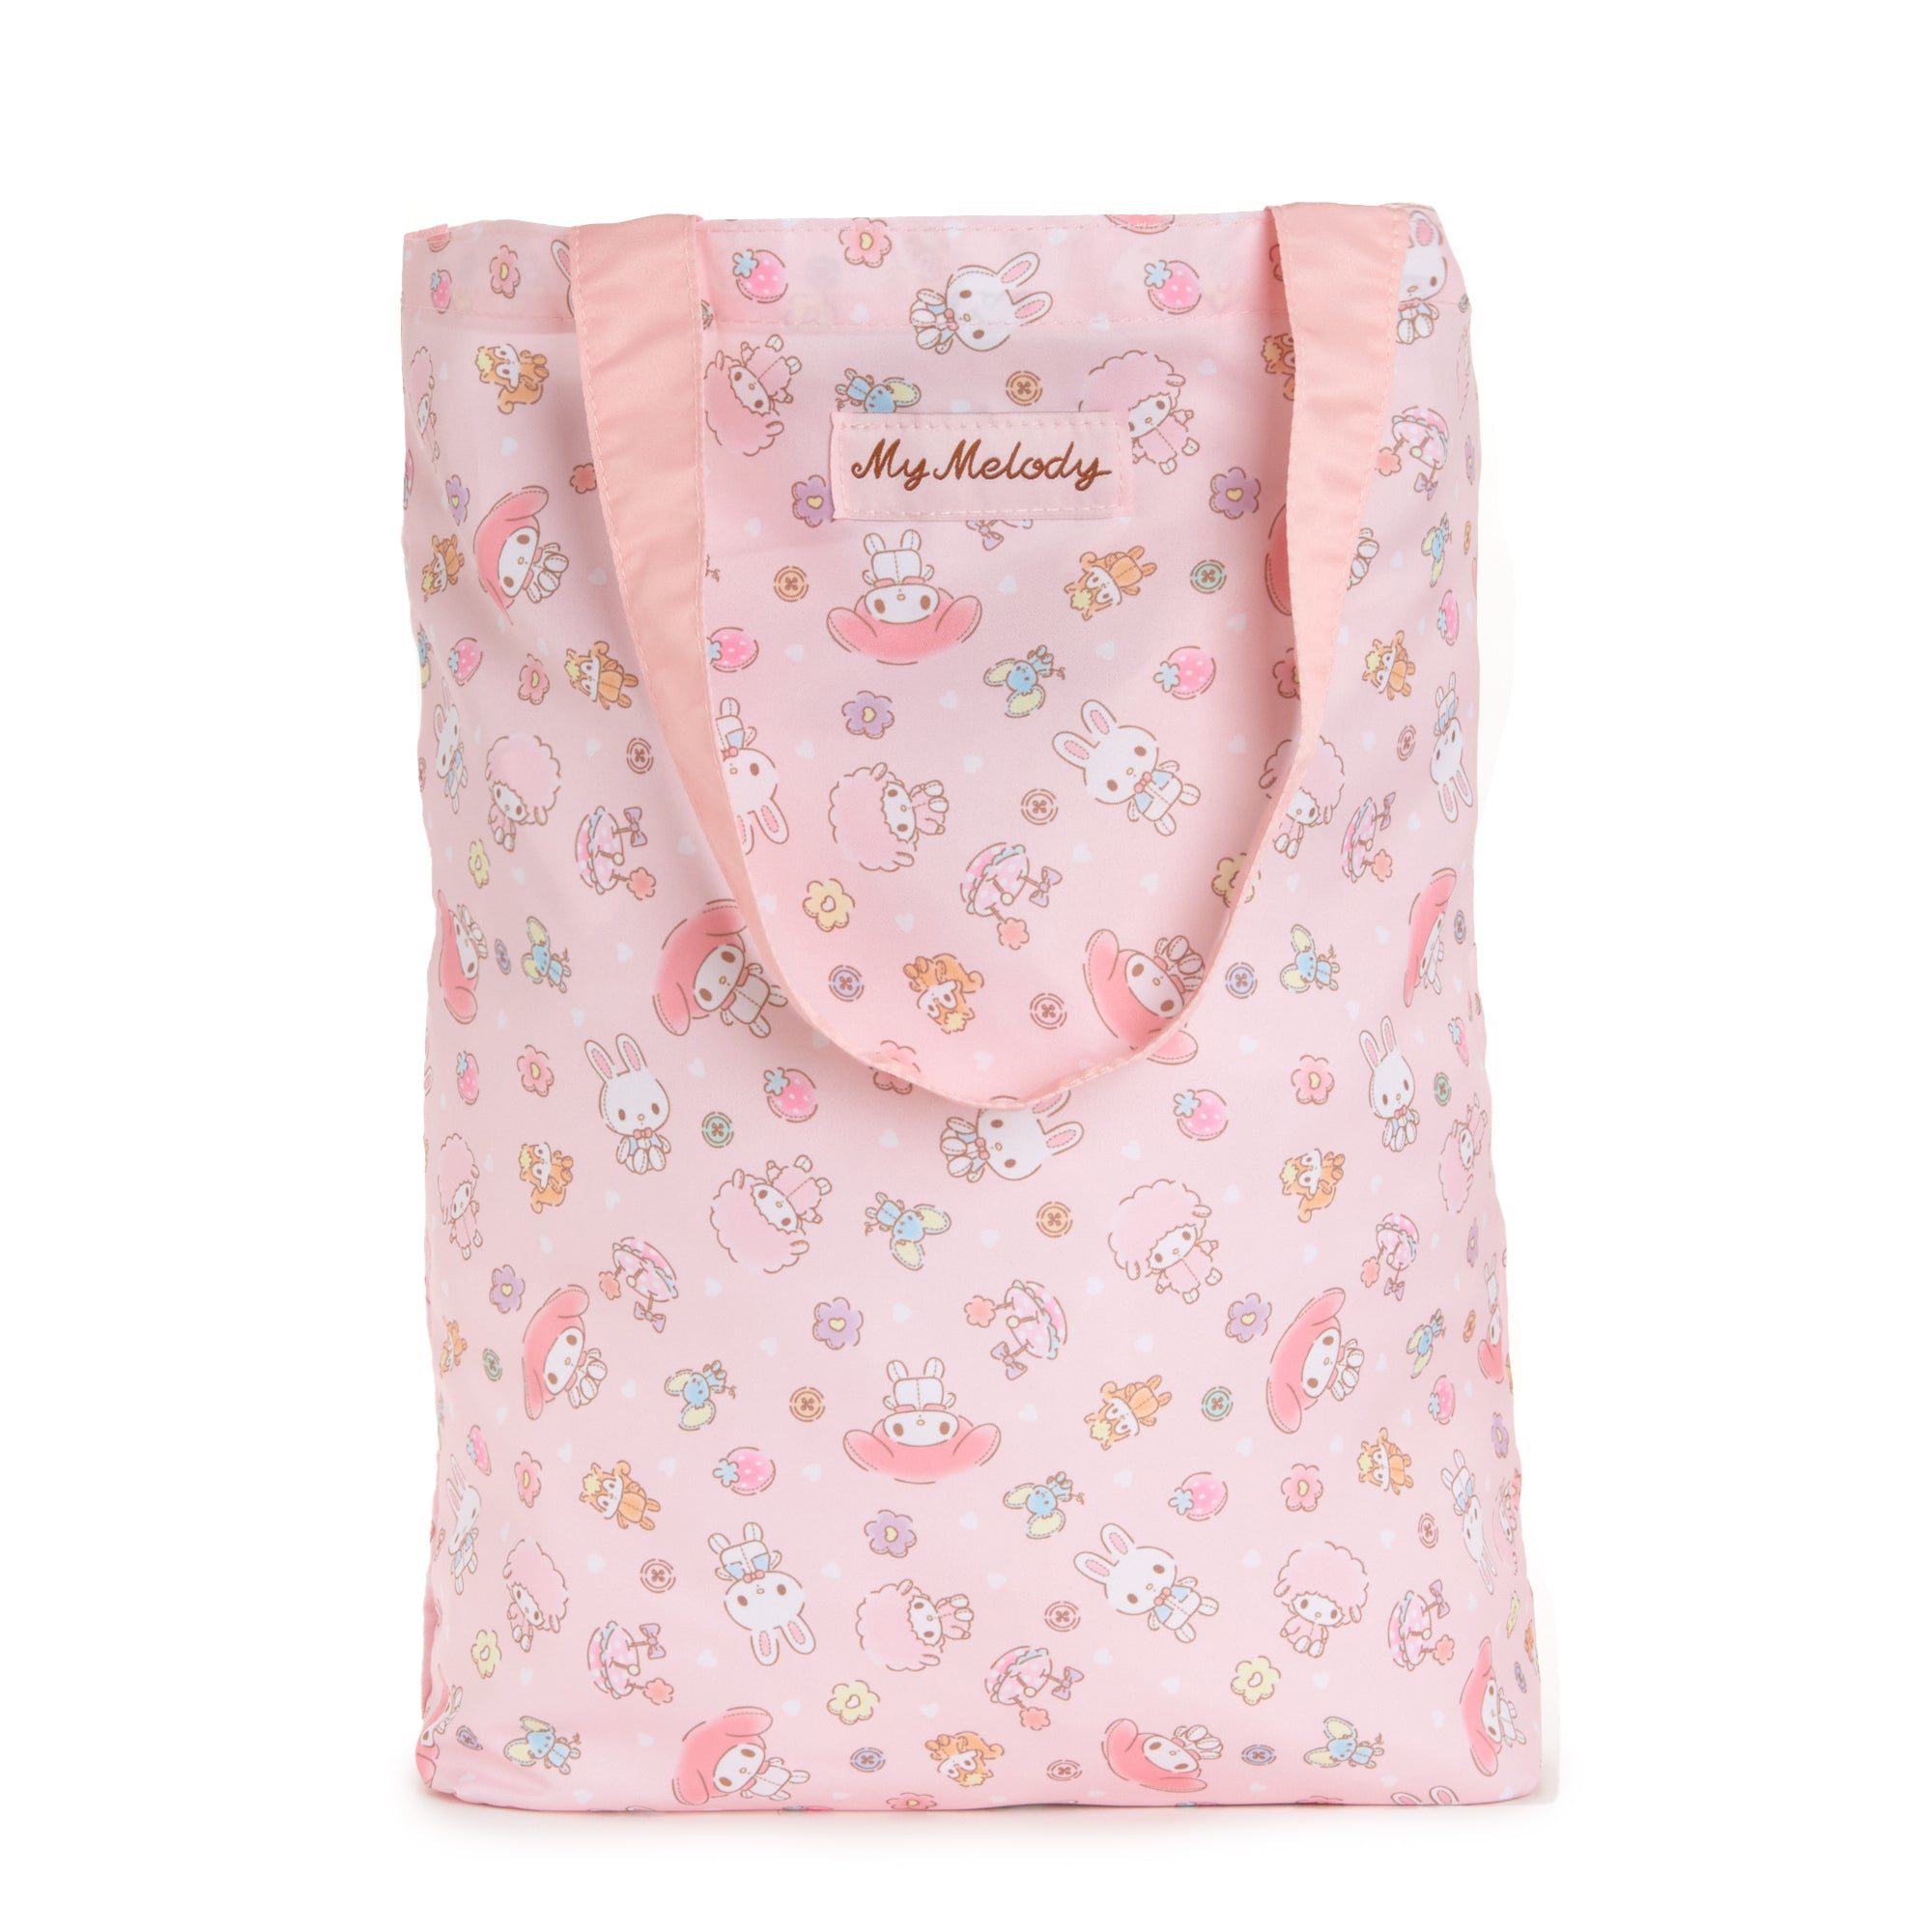 My Melody Reusable Tote Bag (Stitch and Lace Series) Bags Global Original   